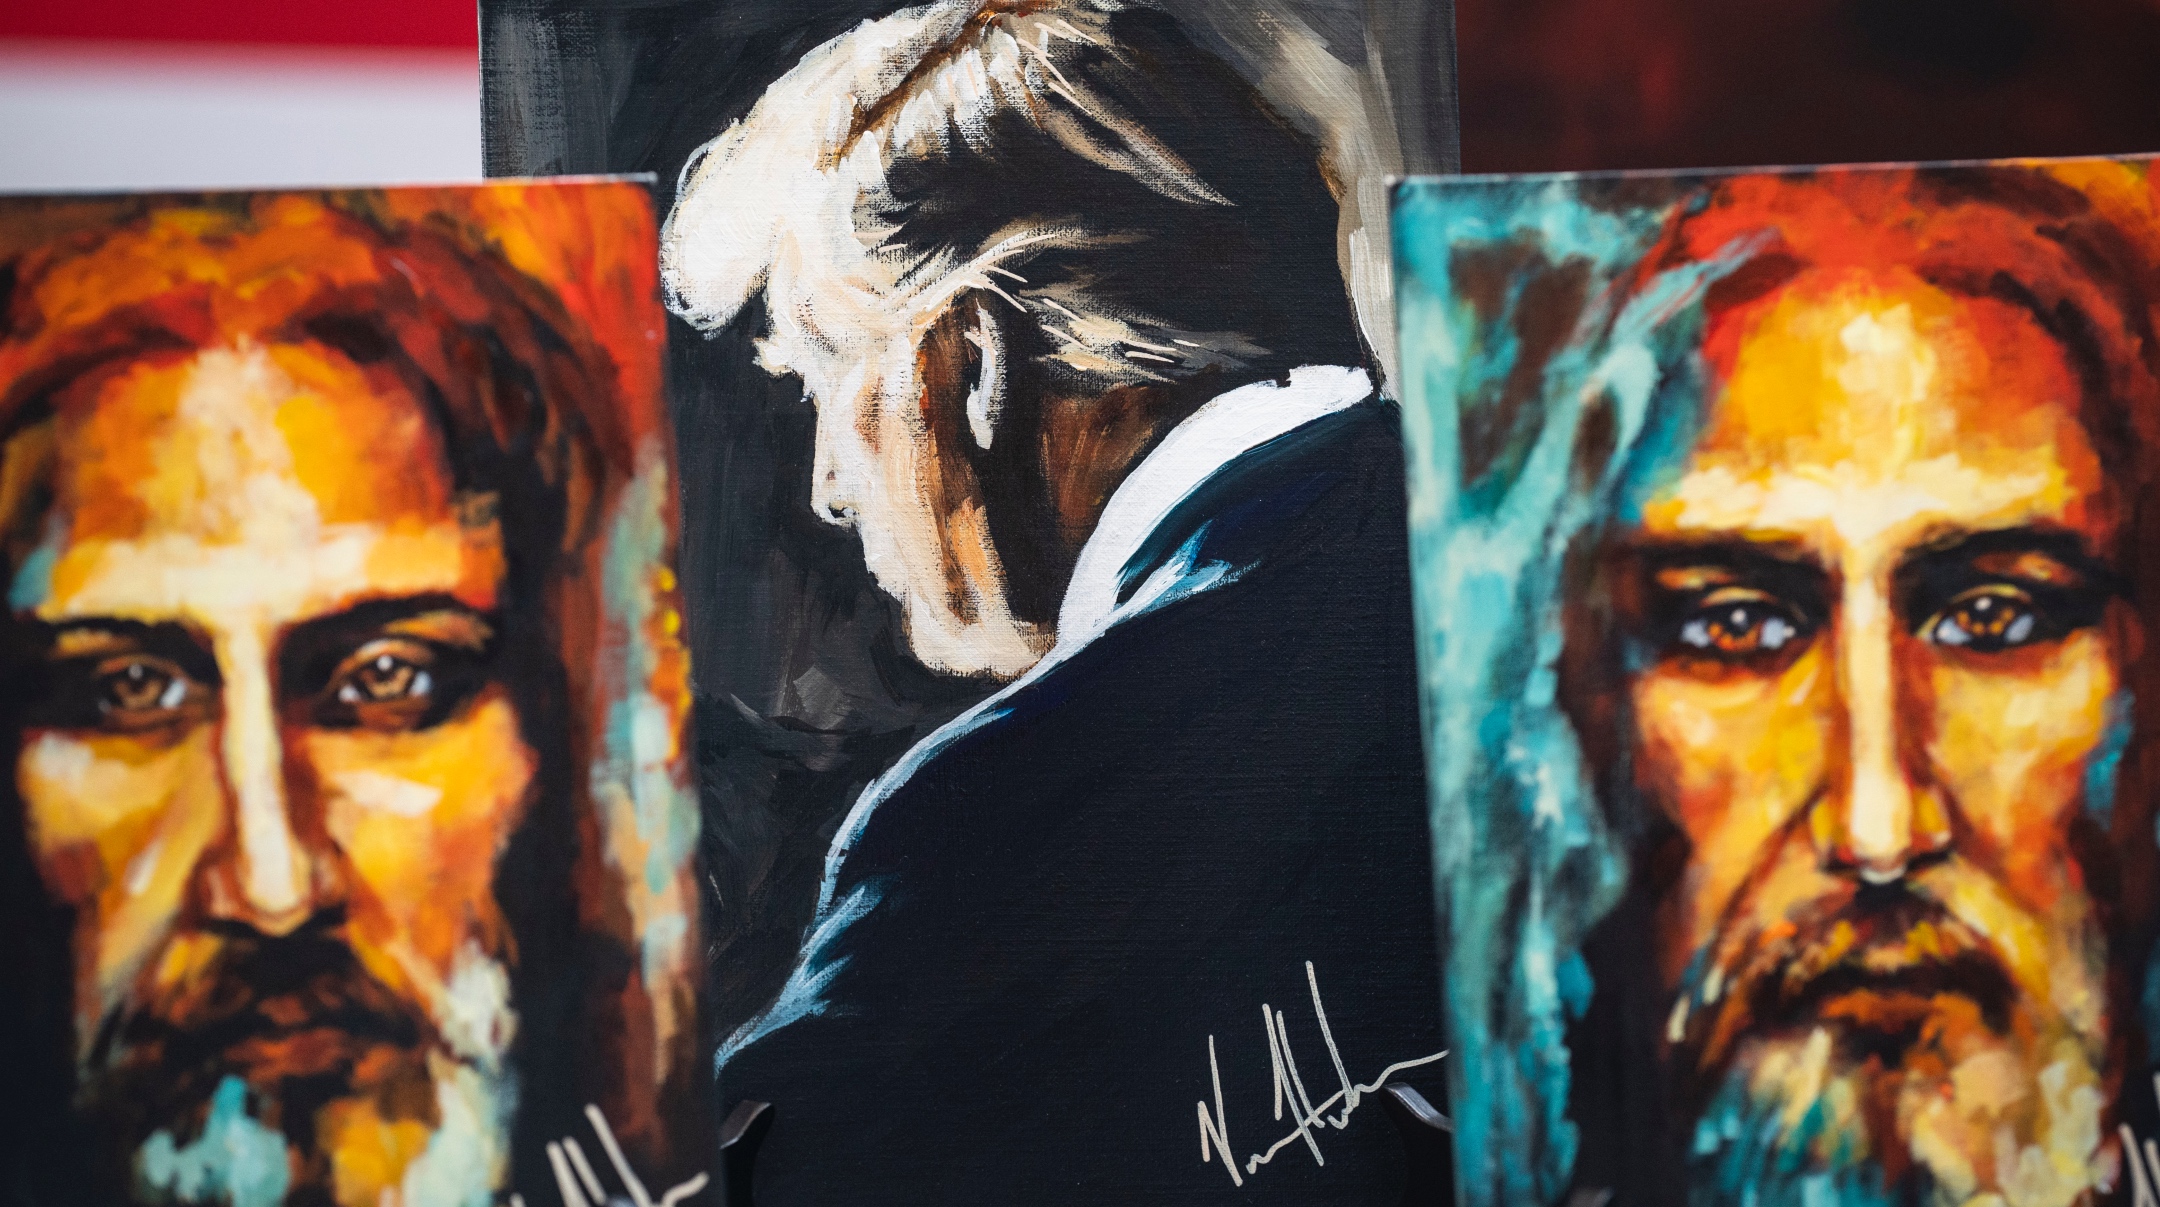 Paintings and prints depicting former President Donald Trump and Jesus are seen for sale on the first day of the Conservative Political Action Conference CPAC held at the Gaylord National Resort & Convention Center in National Harbor, Maryland, March 02, 2023. (Jabin Botsford/The Washington Post via Getty Images)